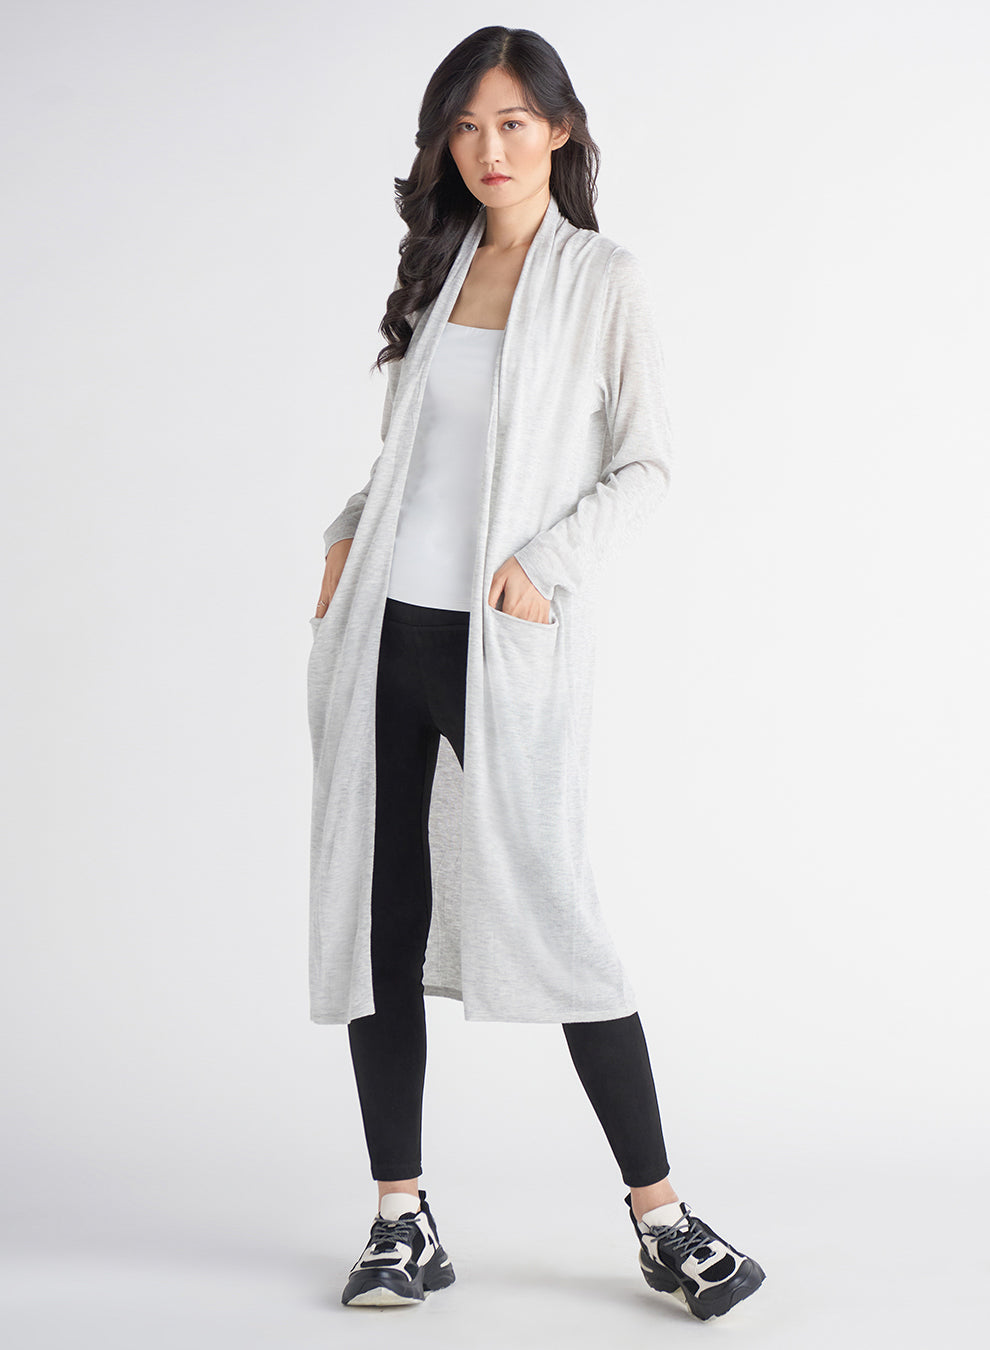 Robe On The Go S. Cardigan-Cardigans-Vixen Collection, Day Spa and Women's Boutique Located in Seattle, Washington